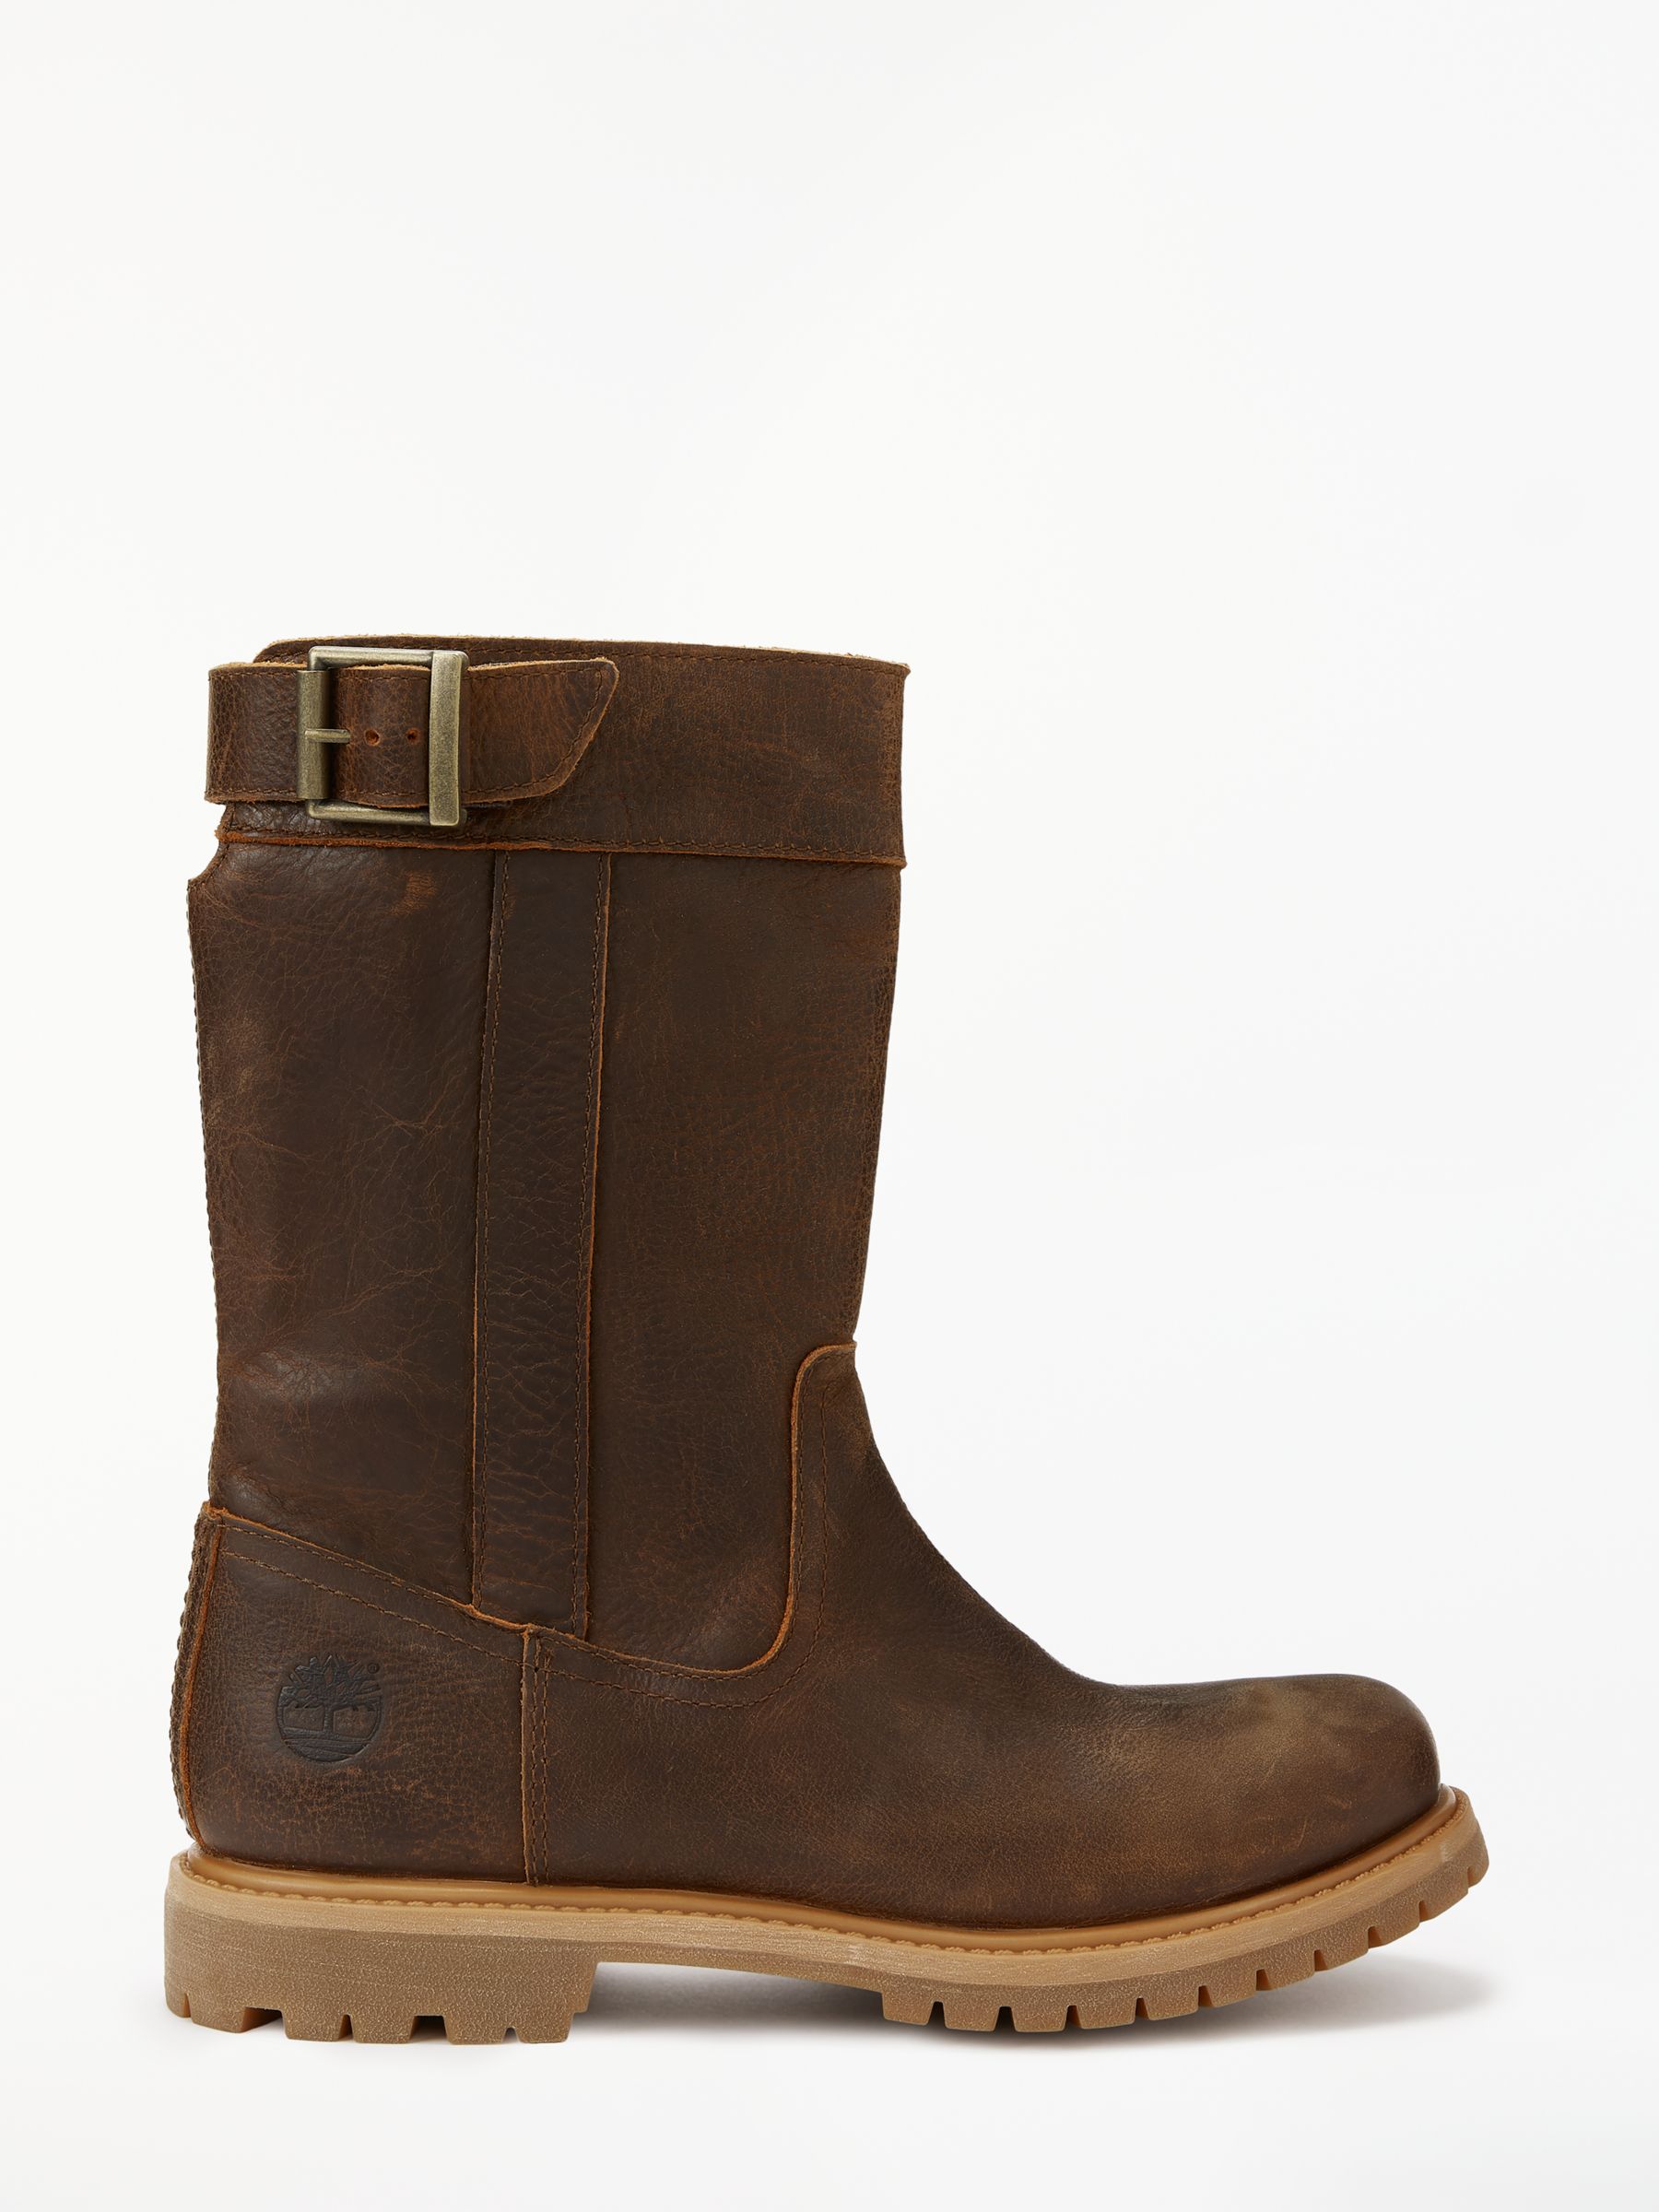 Timberland Women's Nellie Pull On Waterproof Calf Boots, Brown Leather at John Lewis & Partners